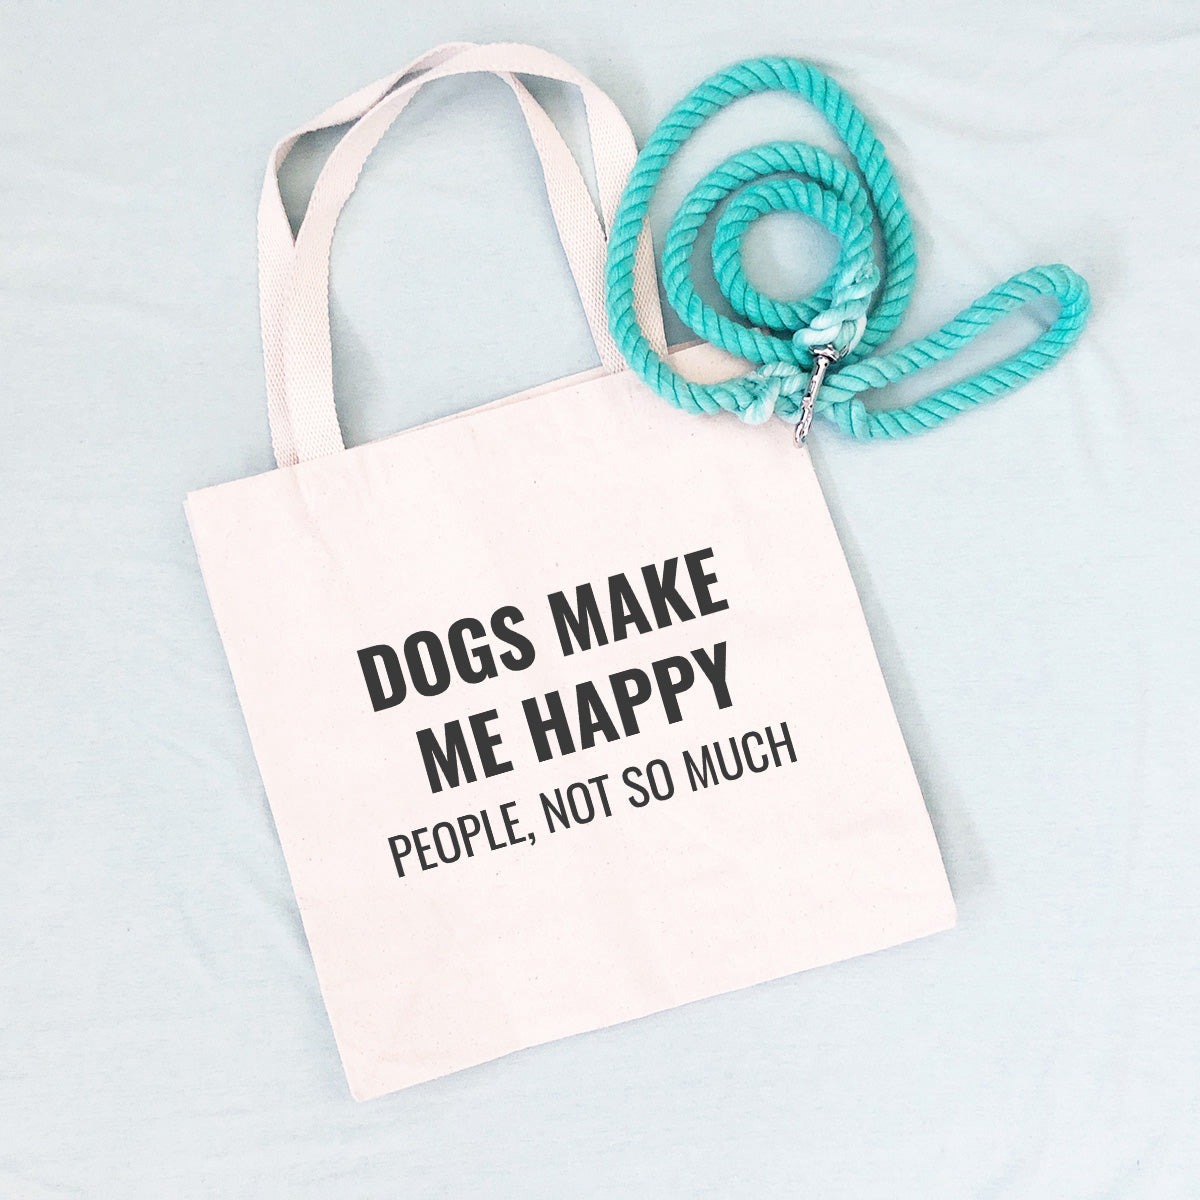 Tote bag that says "DOGS MAKE ME HAPPY PEOPLE, NOT SO MUCH"